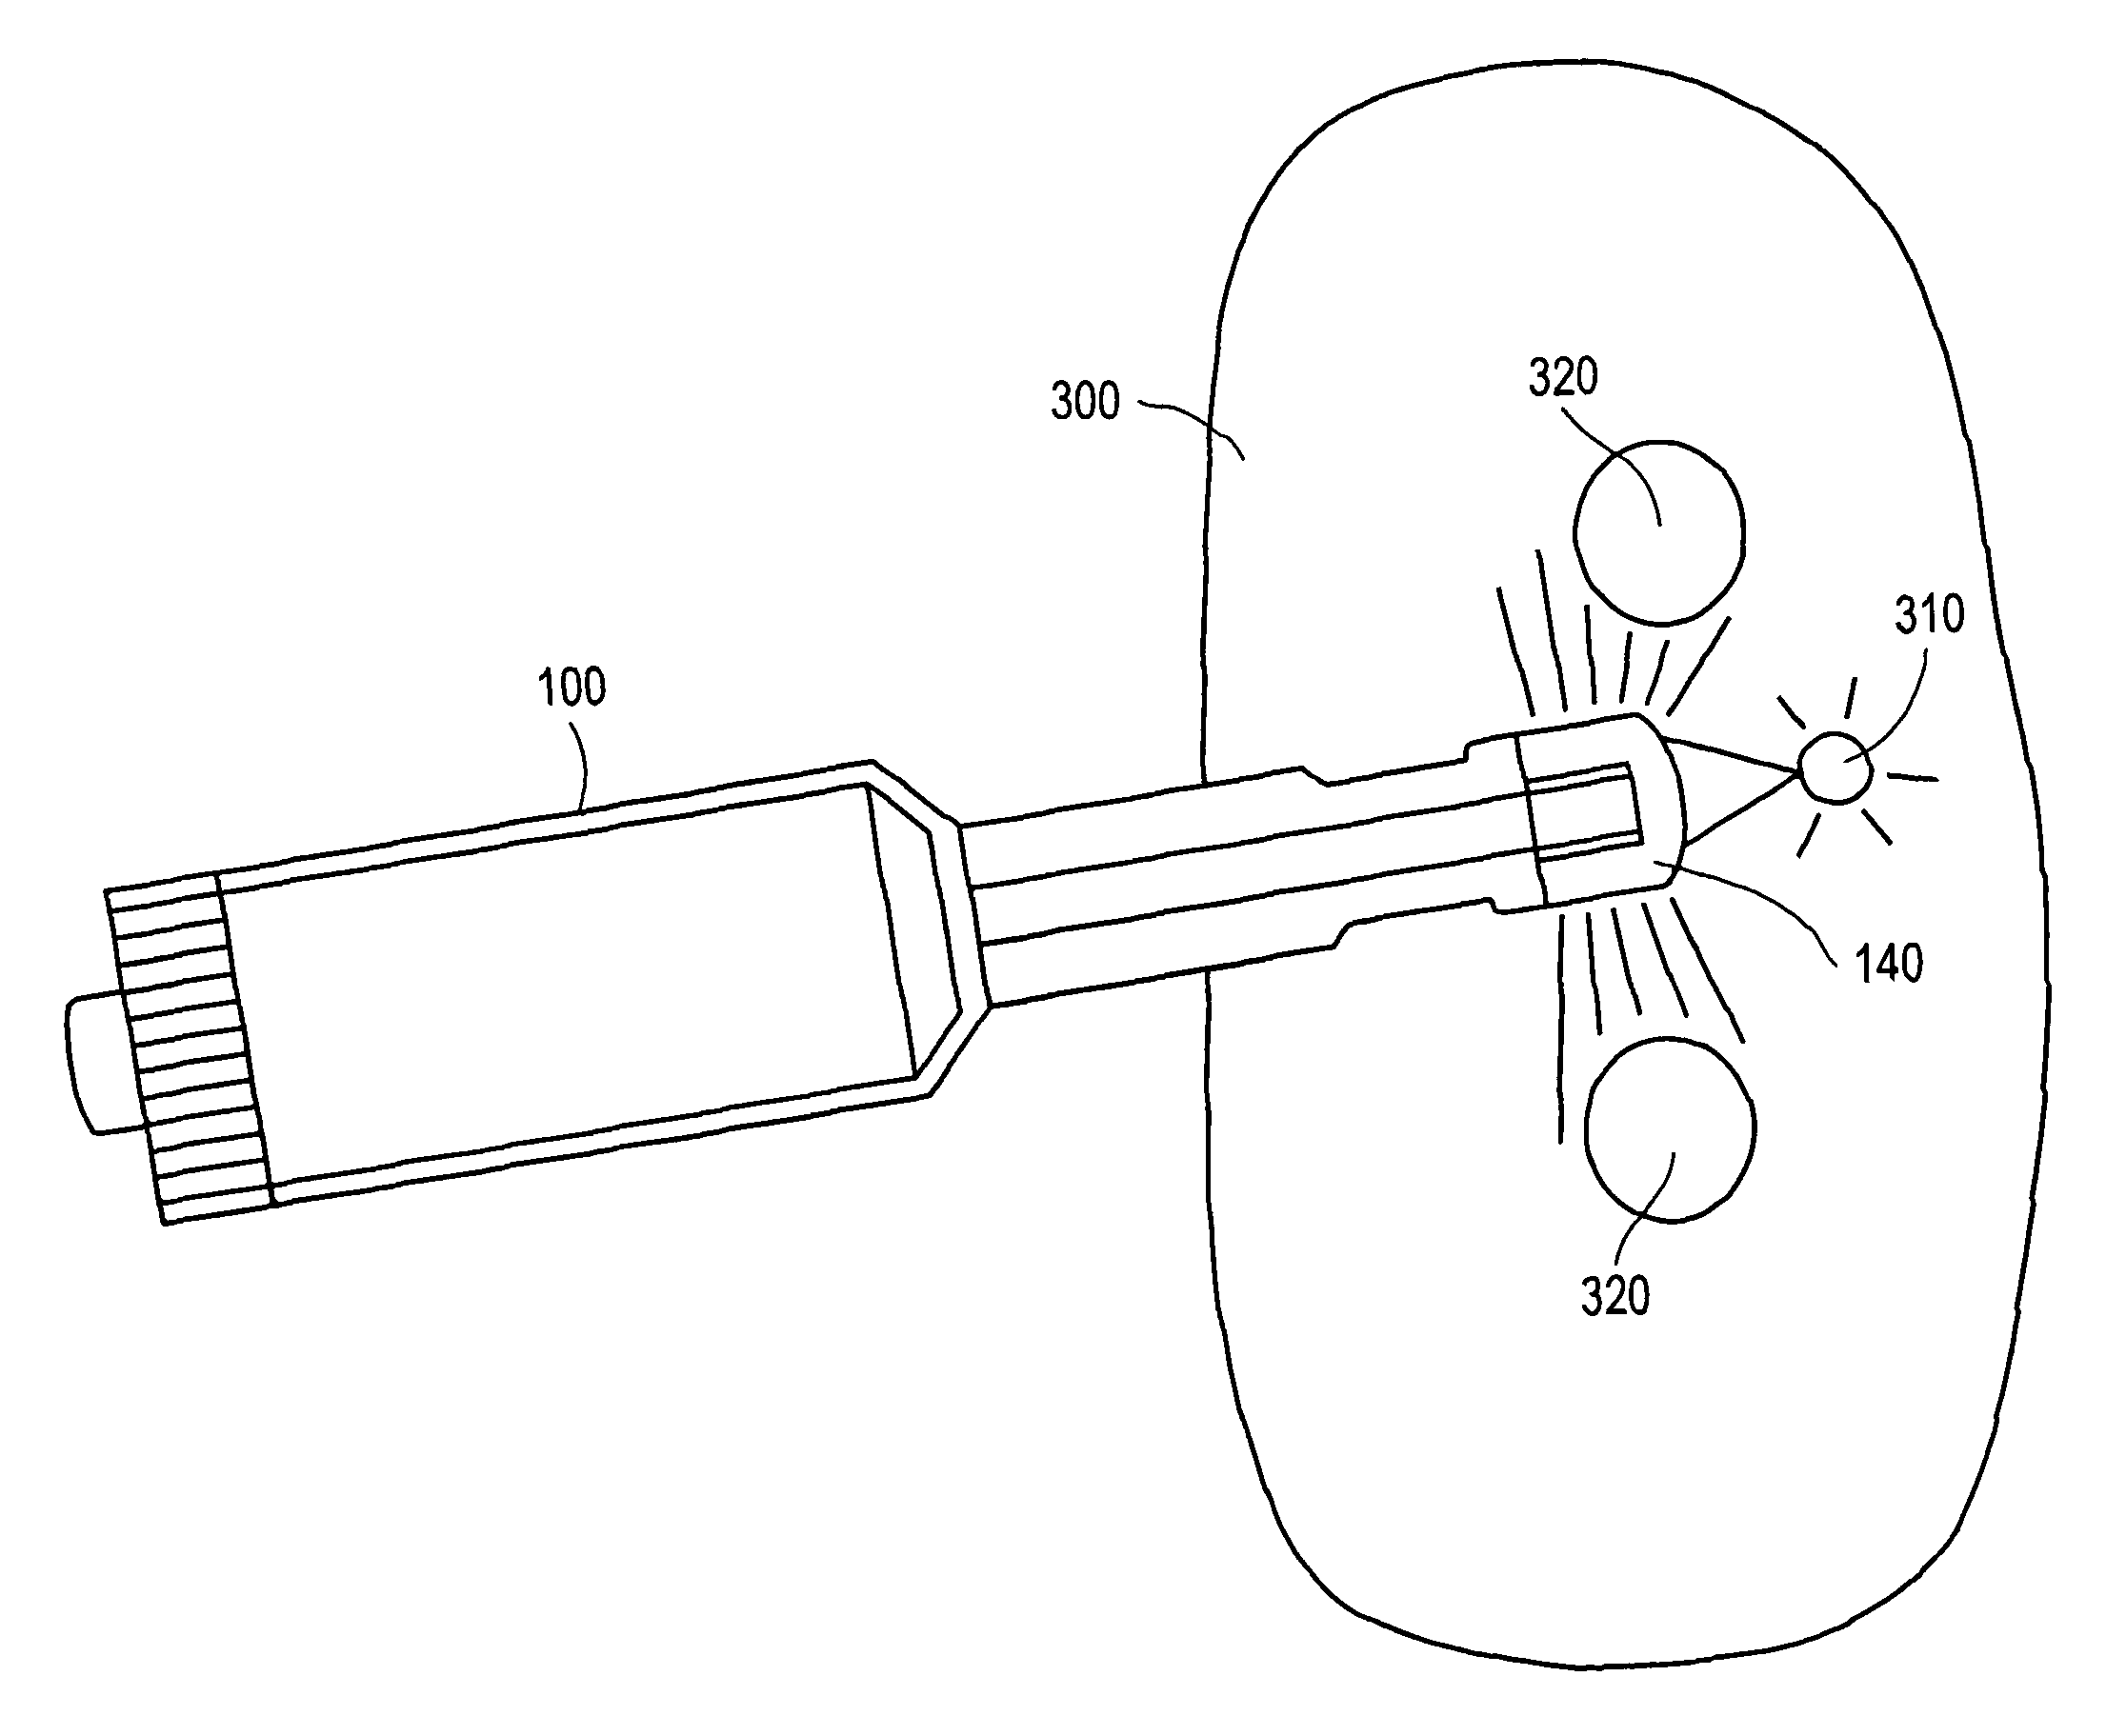 LED lighting apparatus and method of using same for illumination of a body cavity